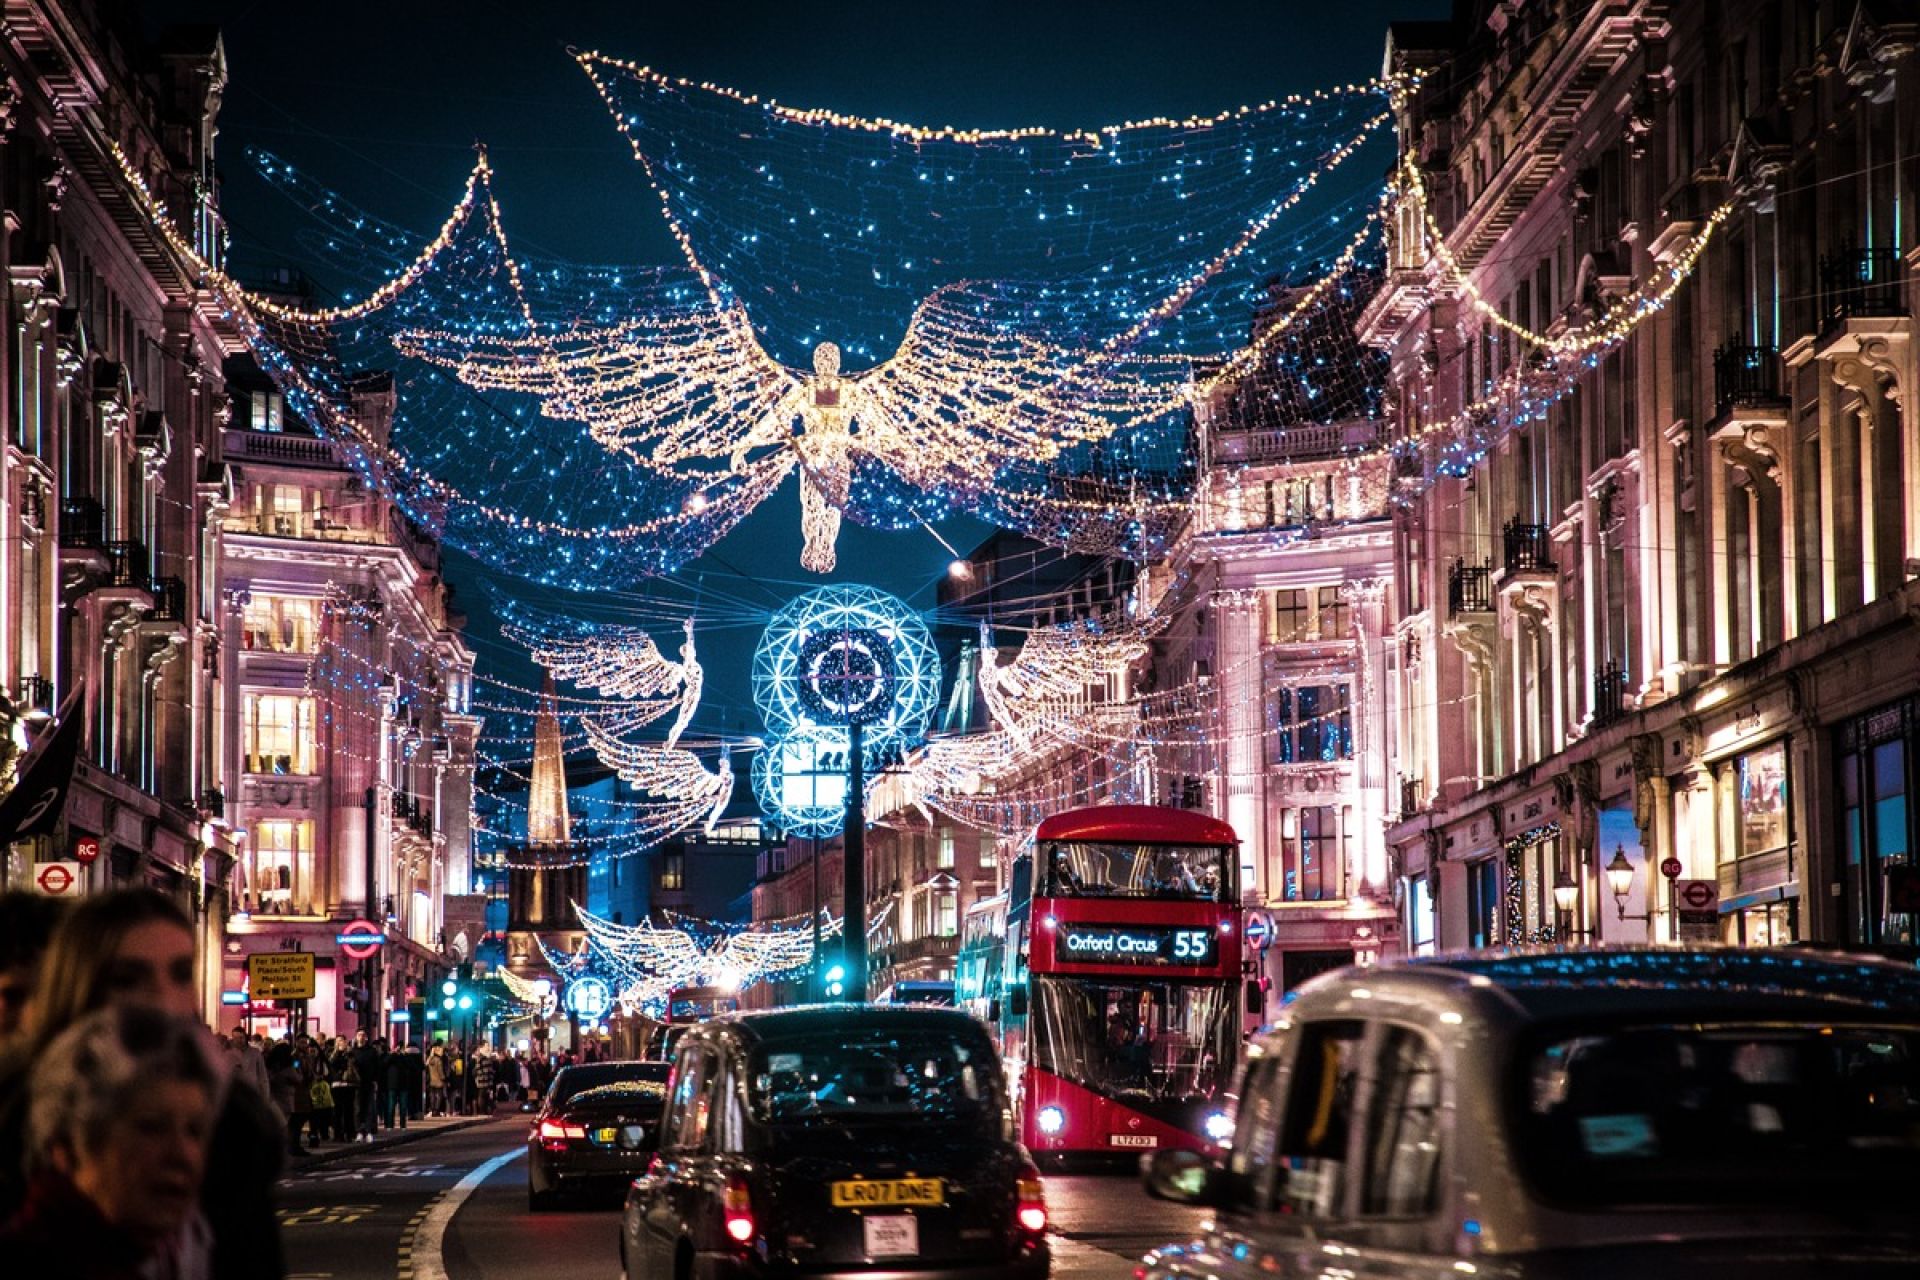 The Most Spectacular Christmas Light Displays in the UK